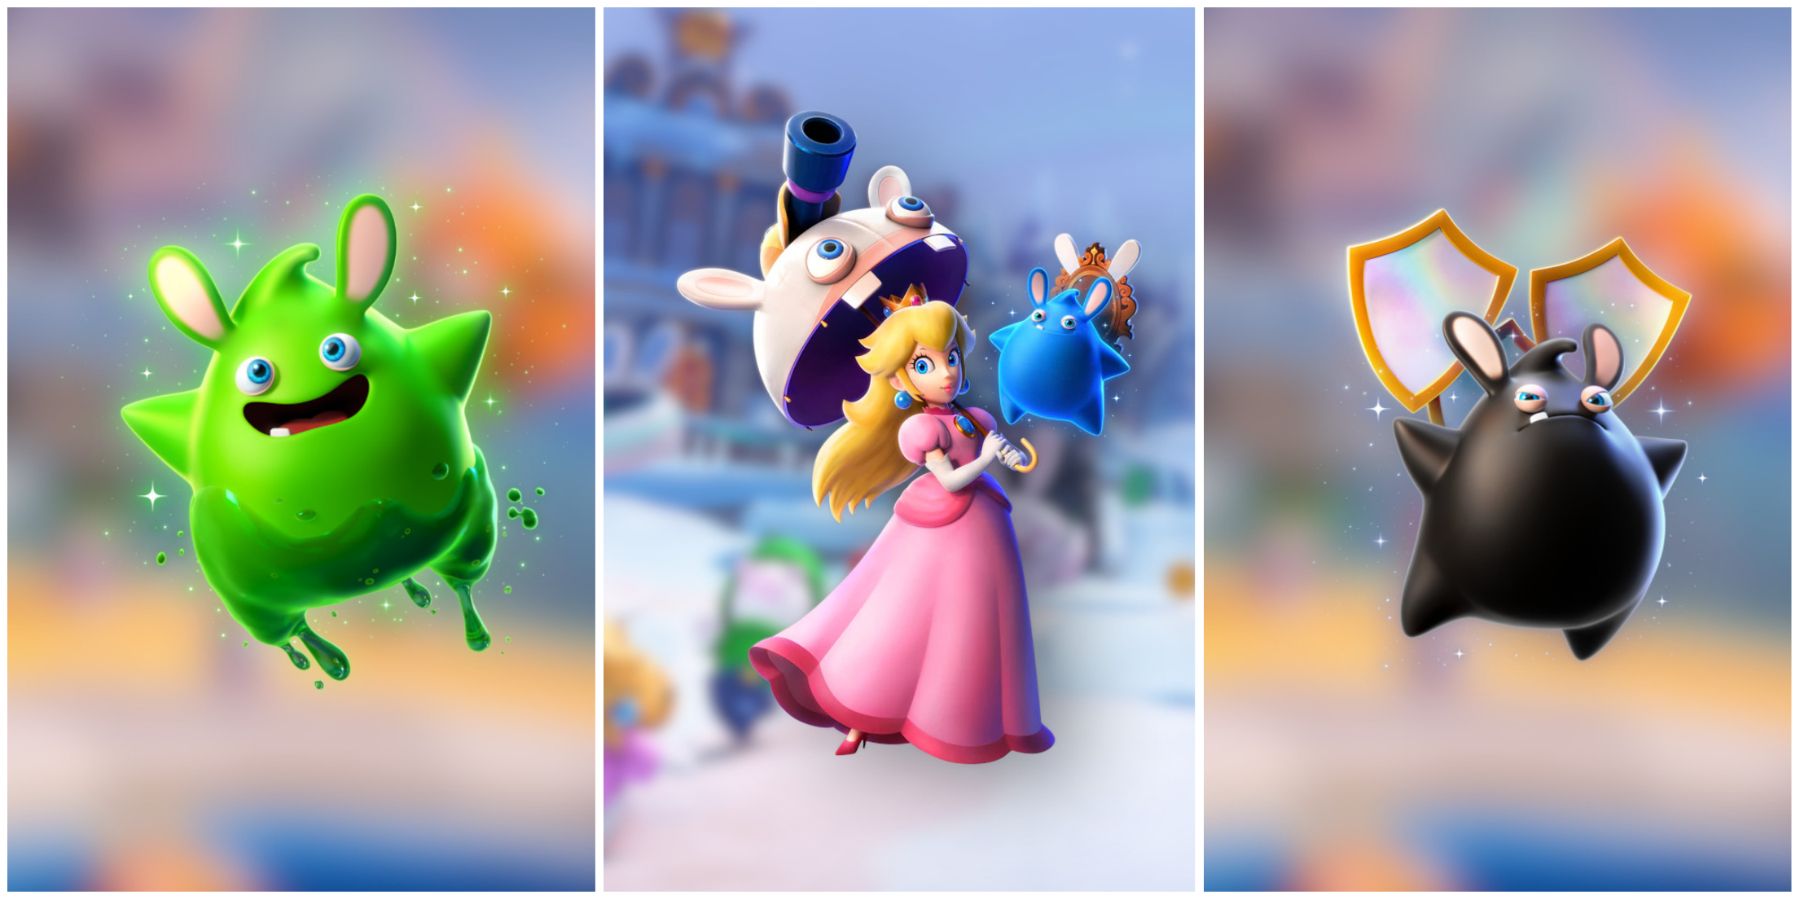 Featured image of Princess Peach and sparks in Mario Rabbids Sparks of Hope